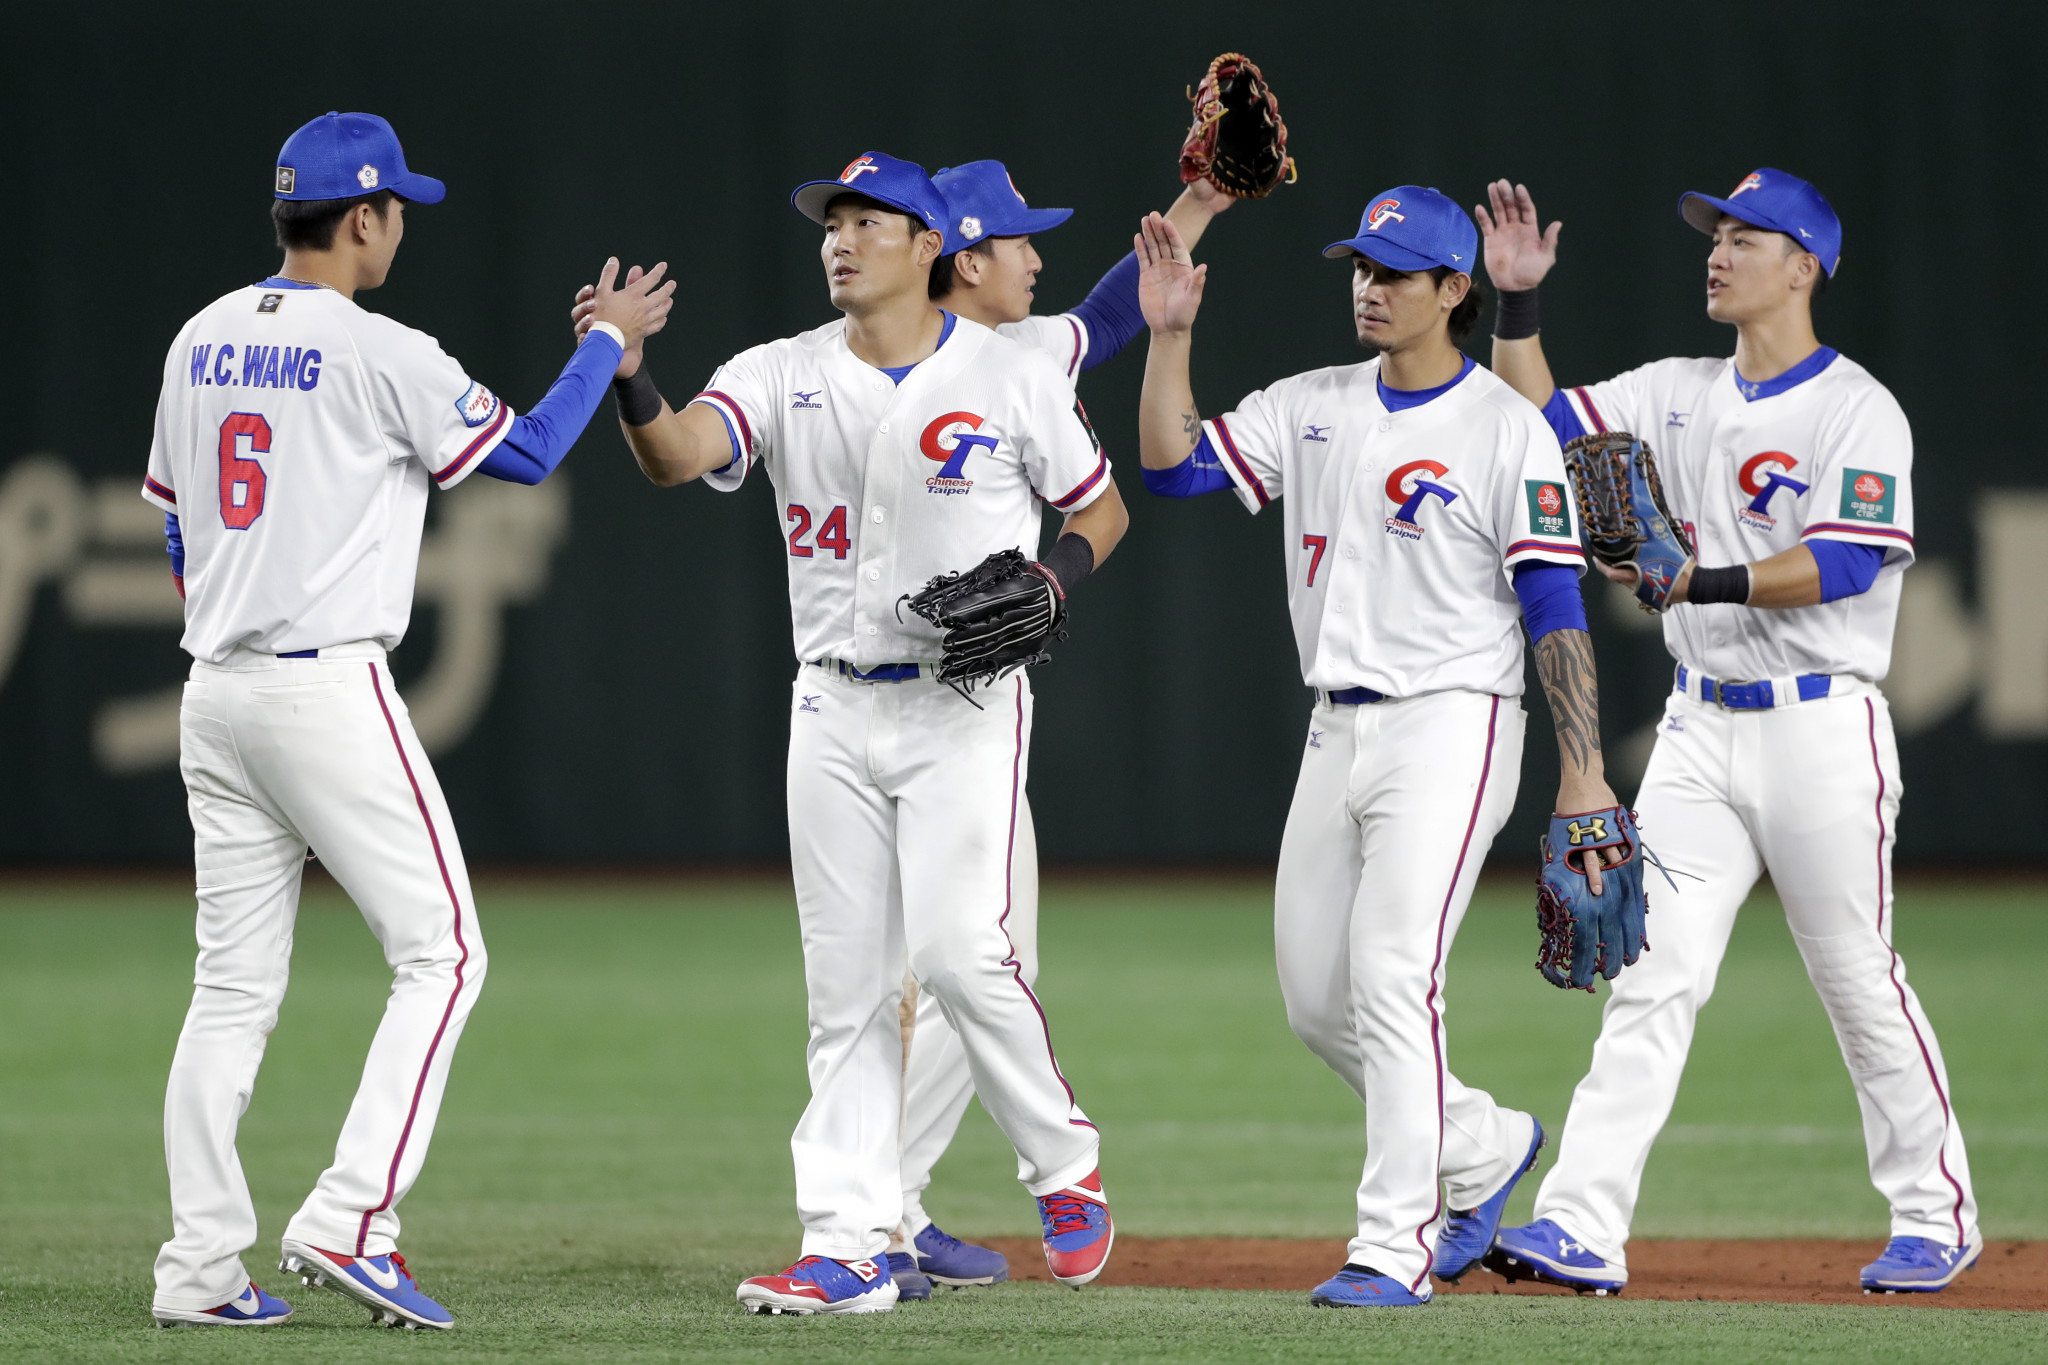 Players stand to earn $1,000 per match from representing the Chinese Taipei Baseball Association in major competitions under the agreement ©Getty Images